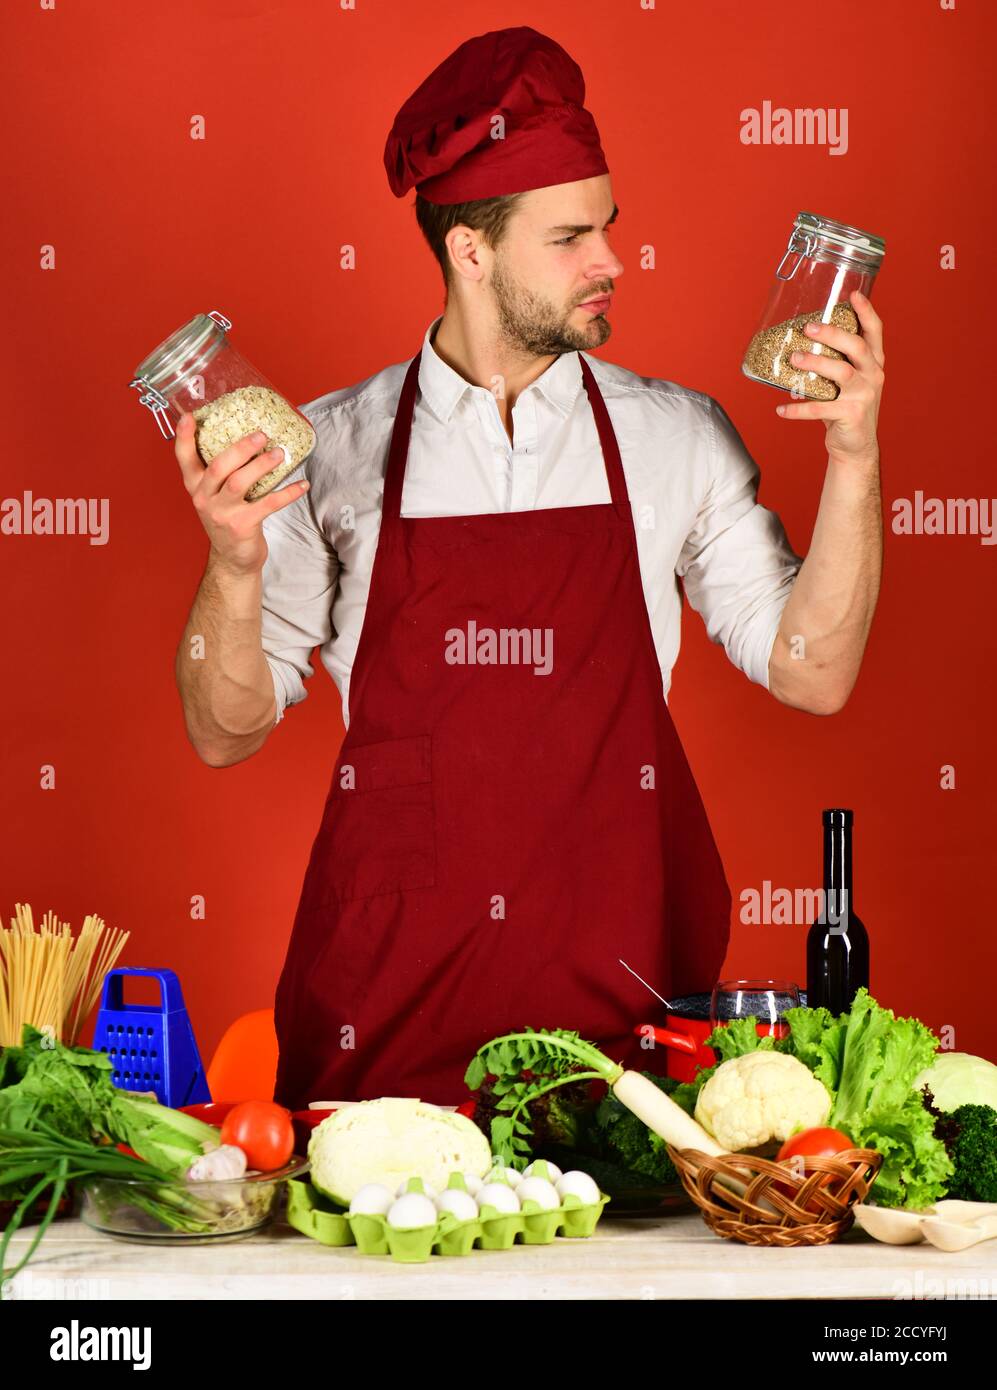 Chef with curious face holds jars with porridge on red background. Man in cook hat and apron uses groats. Cook works in kitchen near table with vegetables and tools. Cuisine and cooking concept. Stock Photo